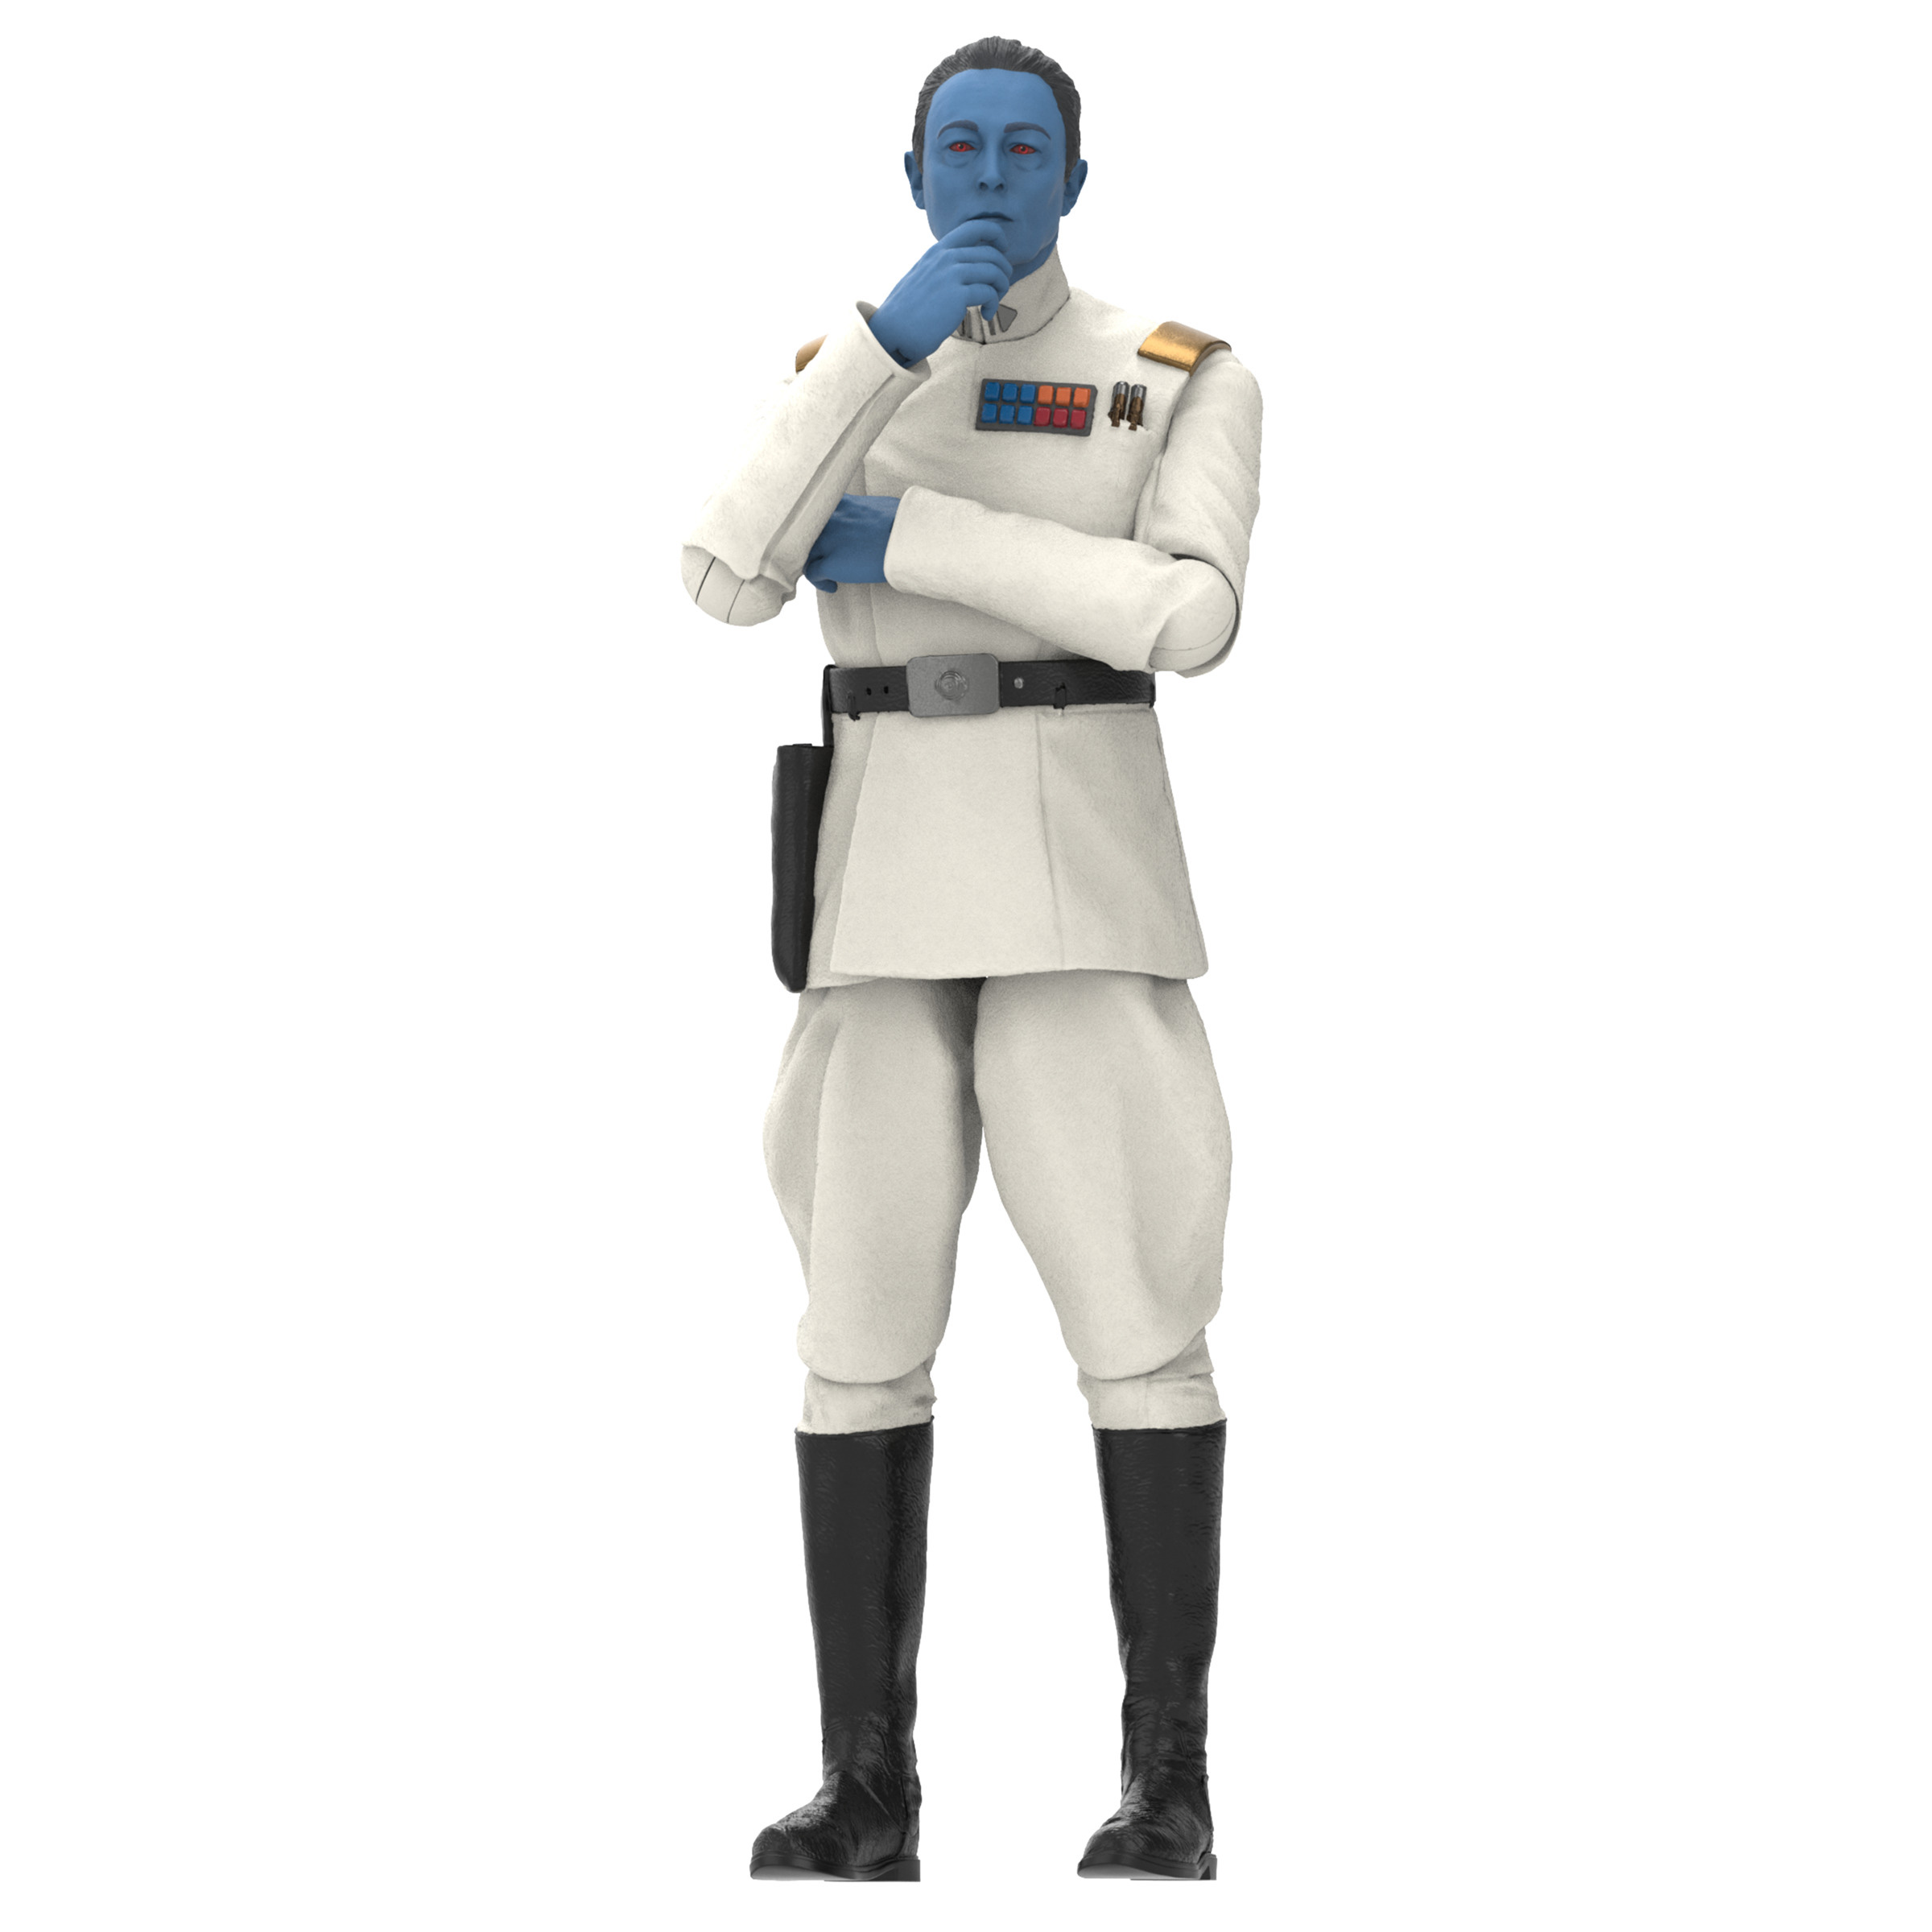 Press Release - New 1/23/24 The Black Series Reveals